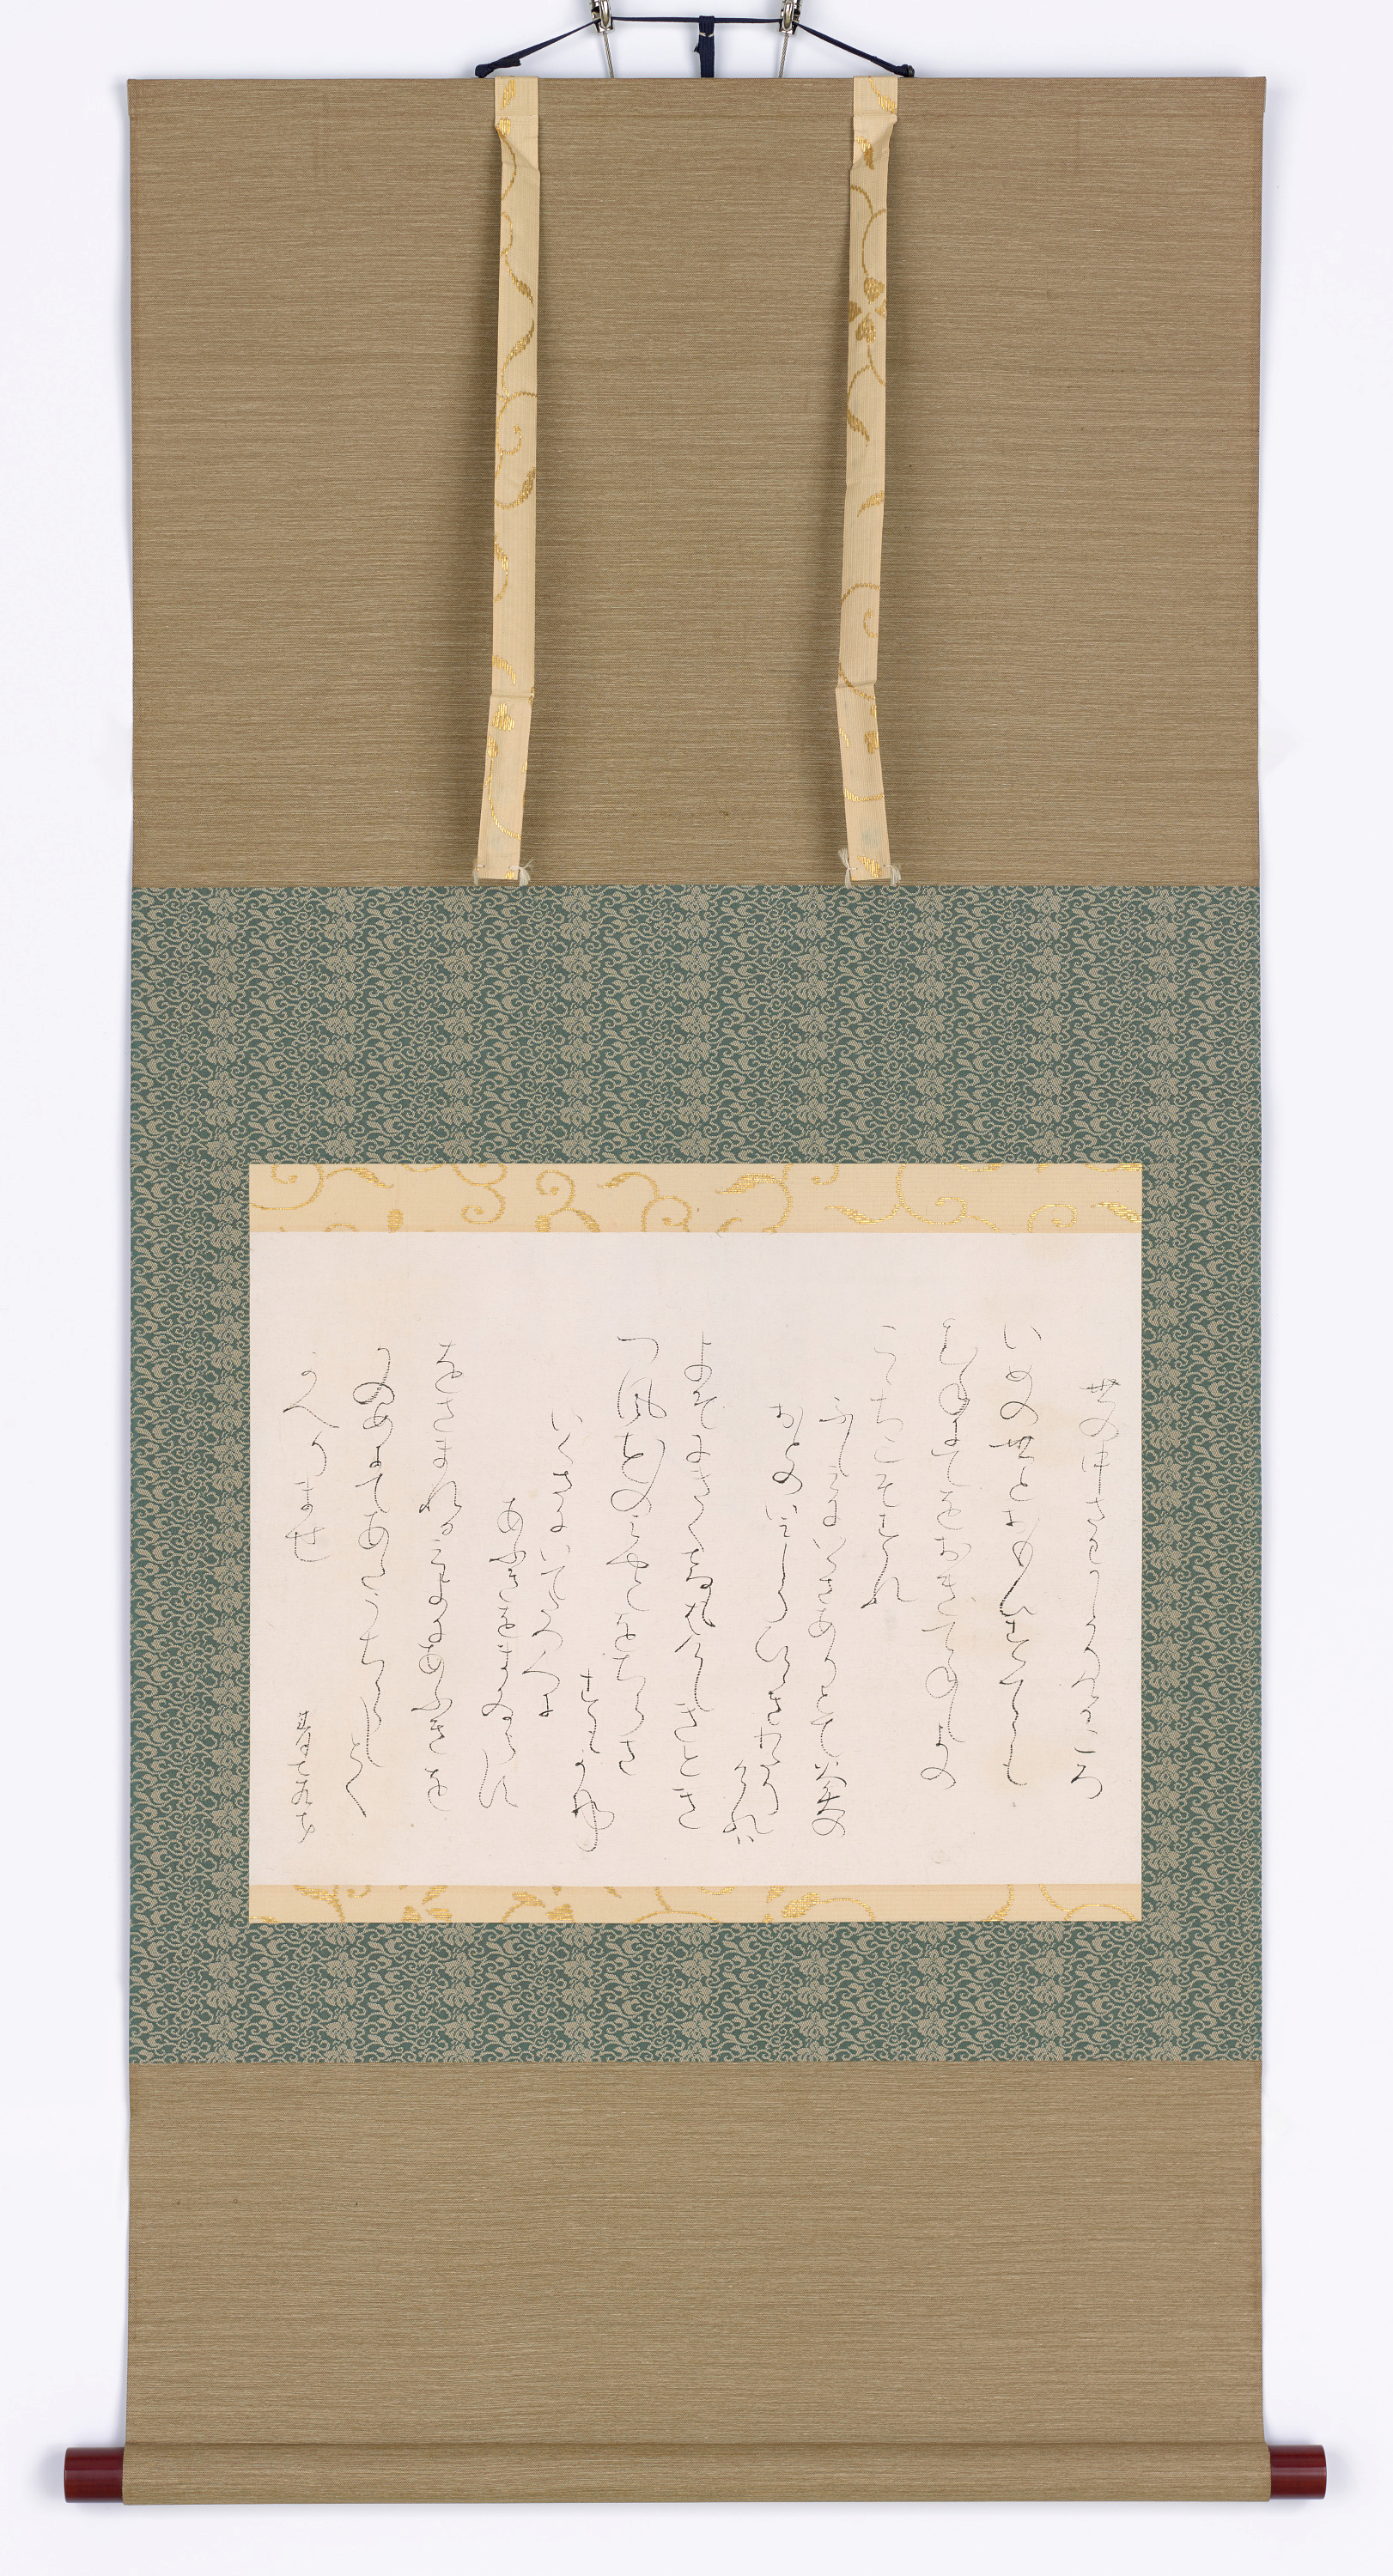 Poem in calligraphy, mounted on a hanging scroll.